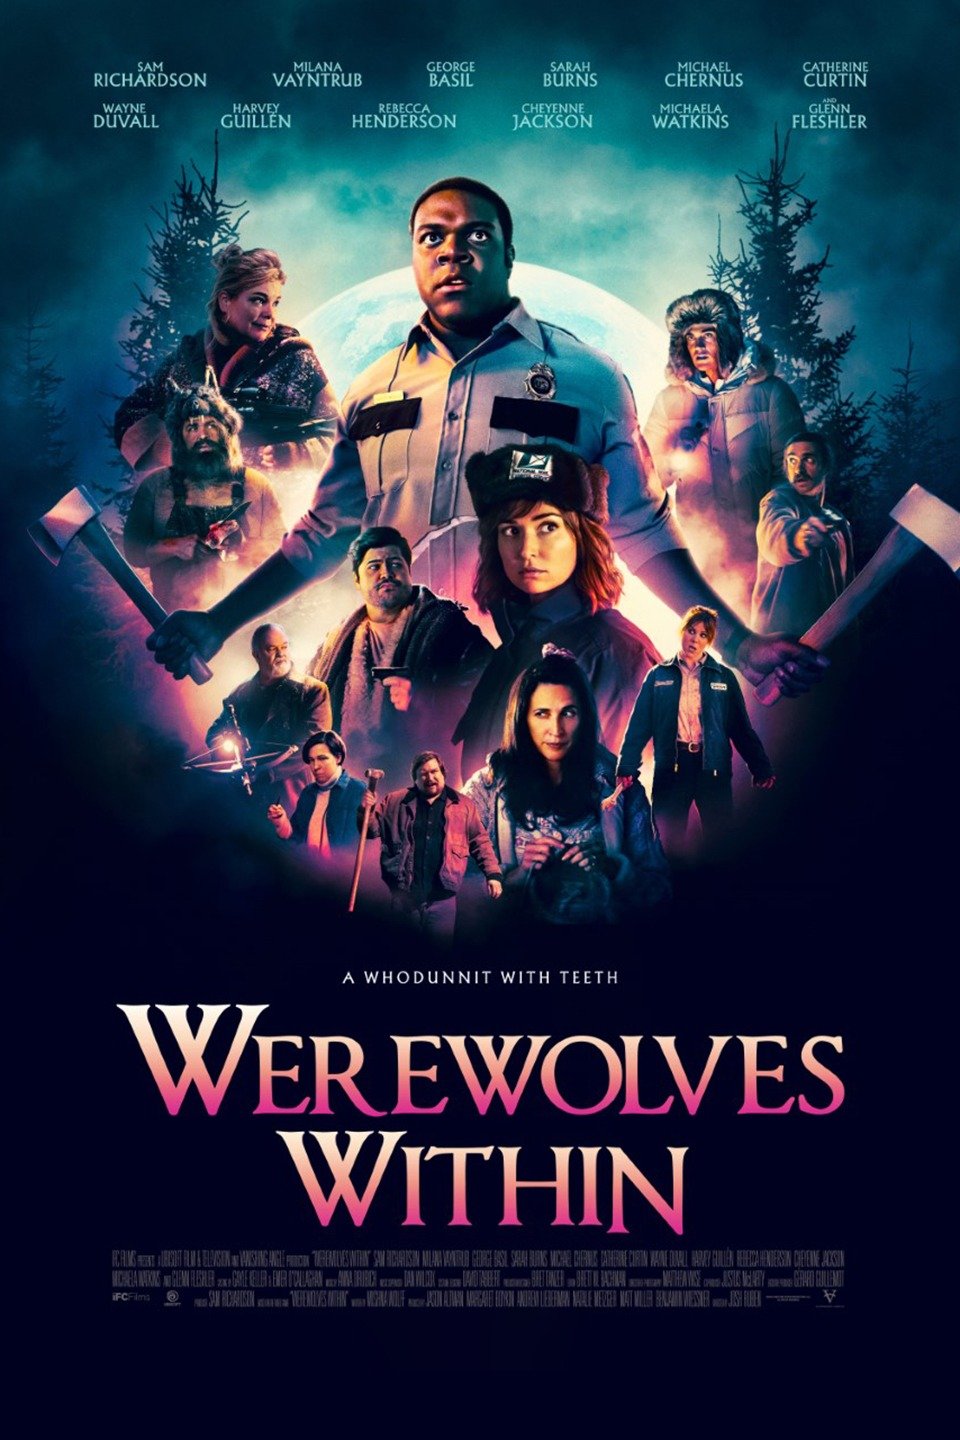 Werewolves Within Teaser Trailer Trailers & Videos Rotten Tomatoes